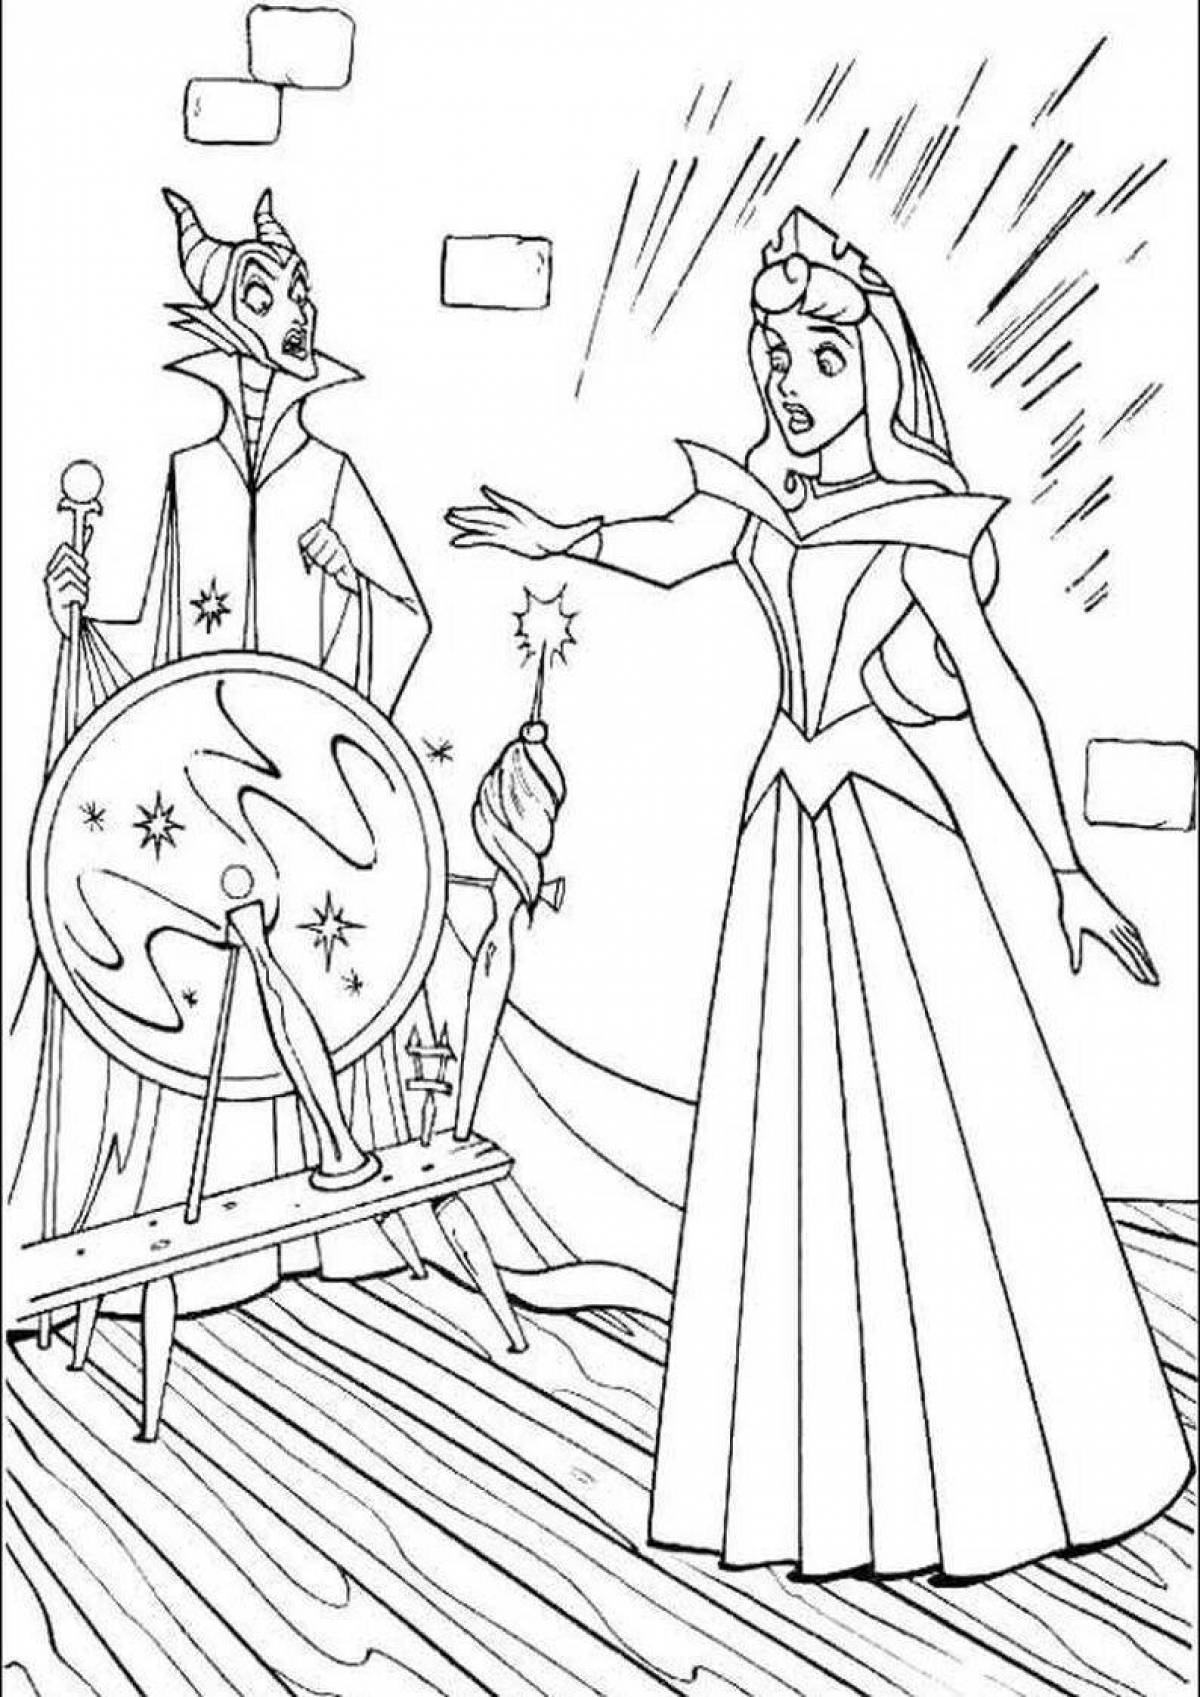 Adorable sleeping beauty coloring book for kids